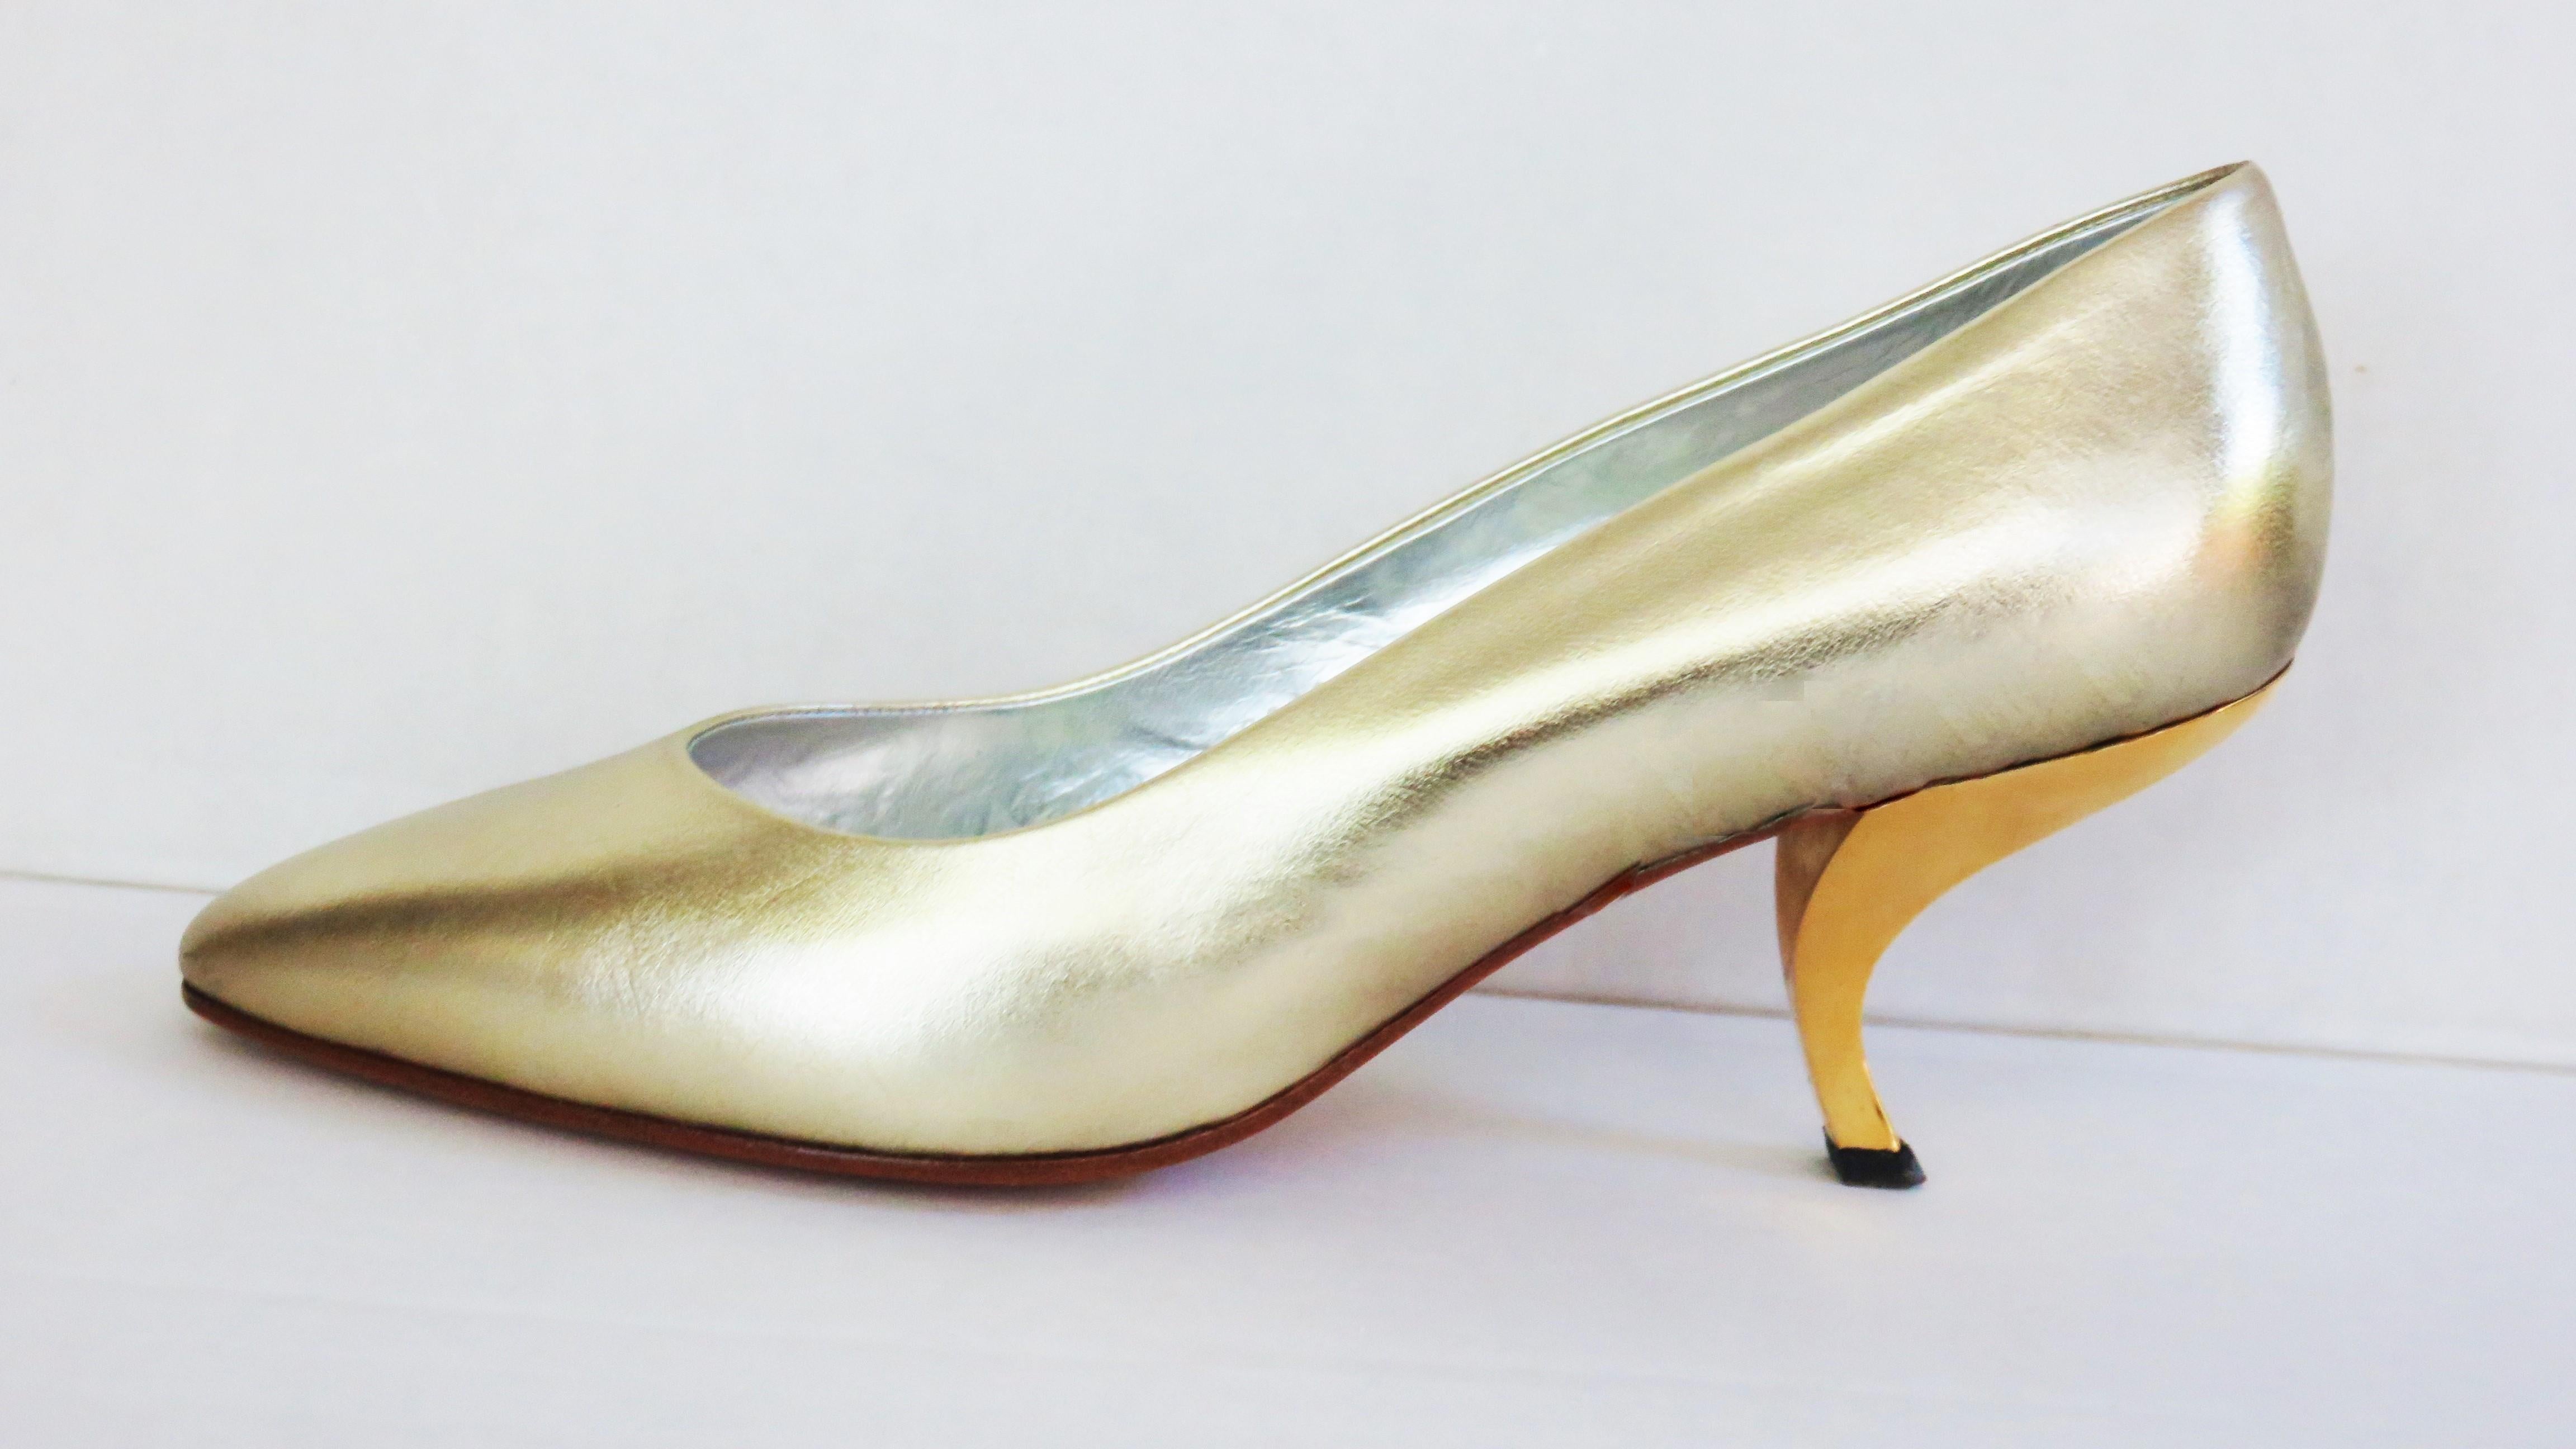 Gorgeous soft gold leather original comma heel pumps by Roger Vivier. They have leather uppers and soles and are lined in silver leather.  
Marked US size 8 (but run smaller). Small scuff on left shoe front.

Insole Length  9 7/8